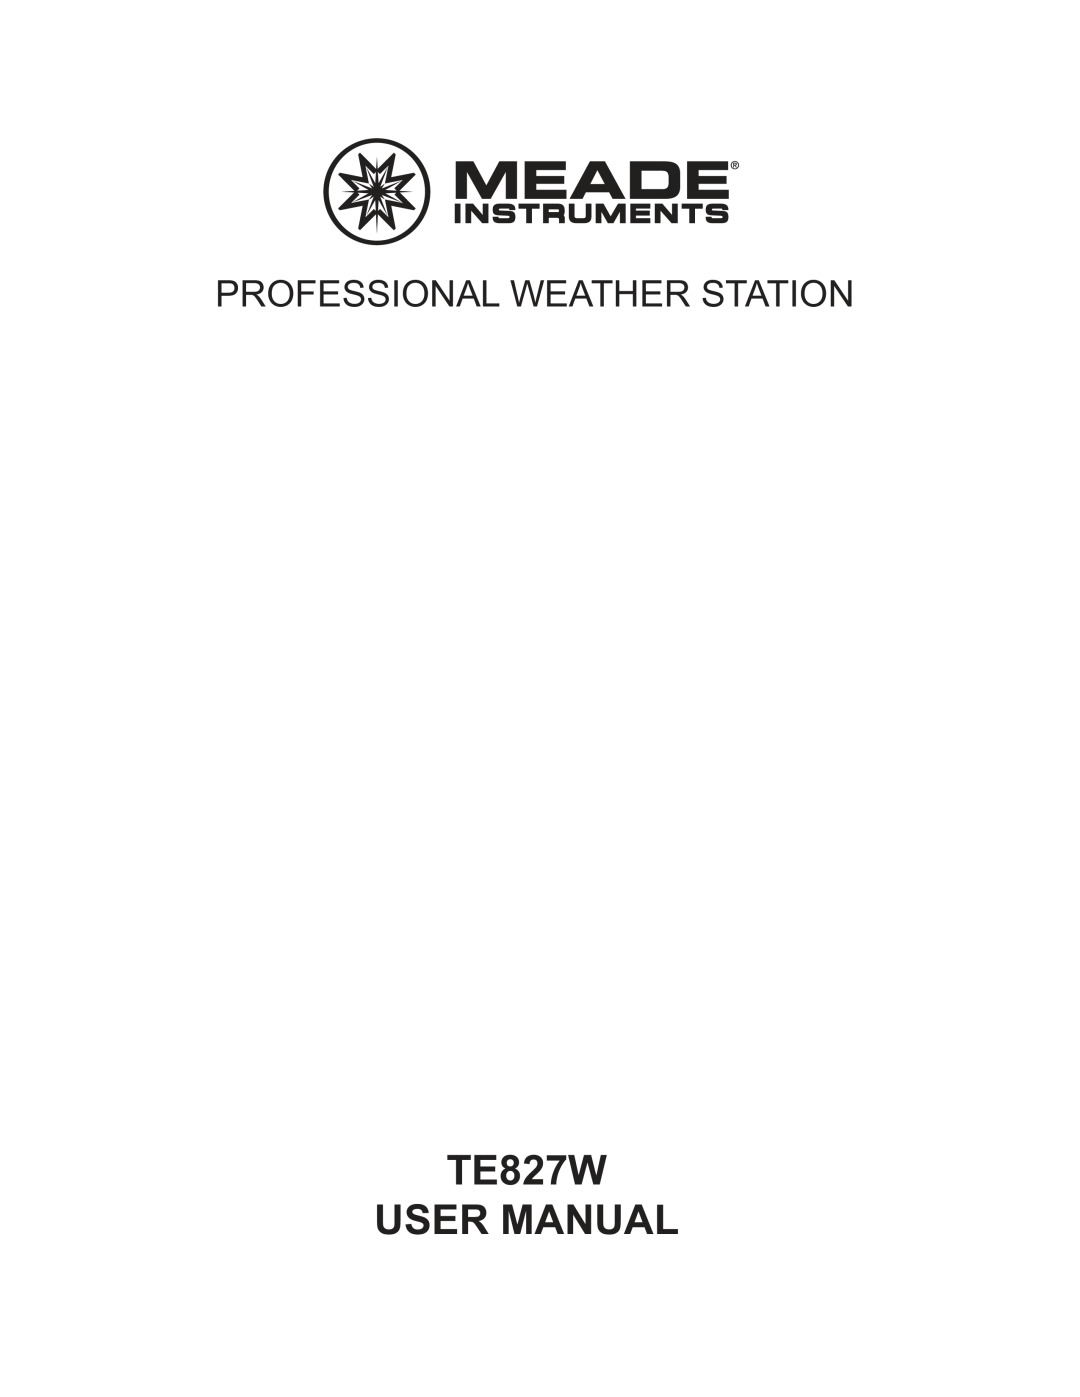 Meade TE827W user manual Professional Weather Station 